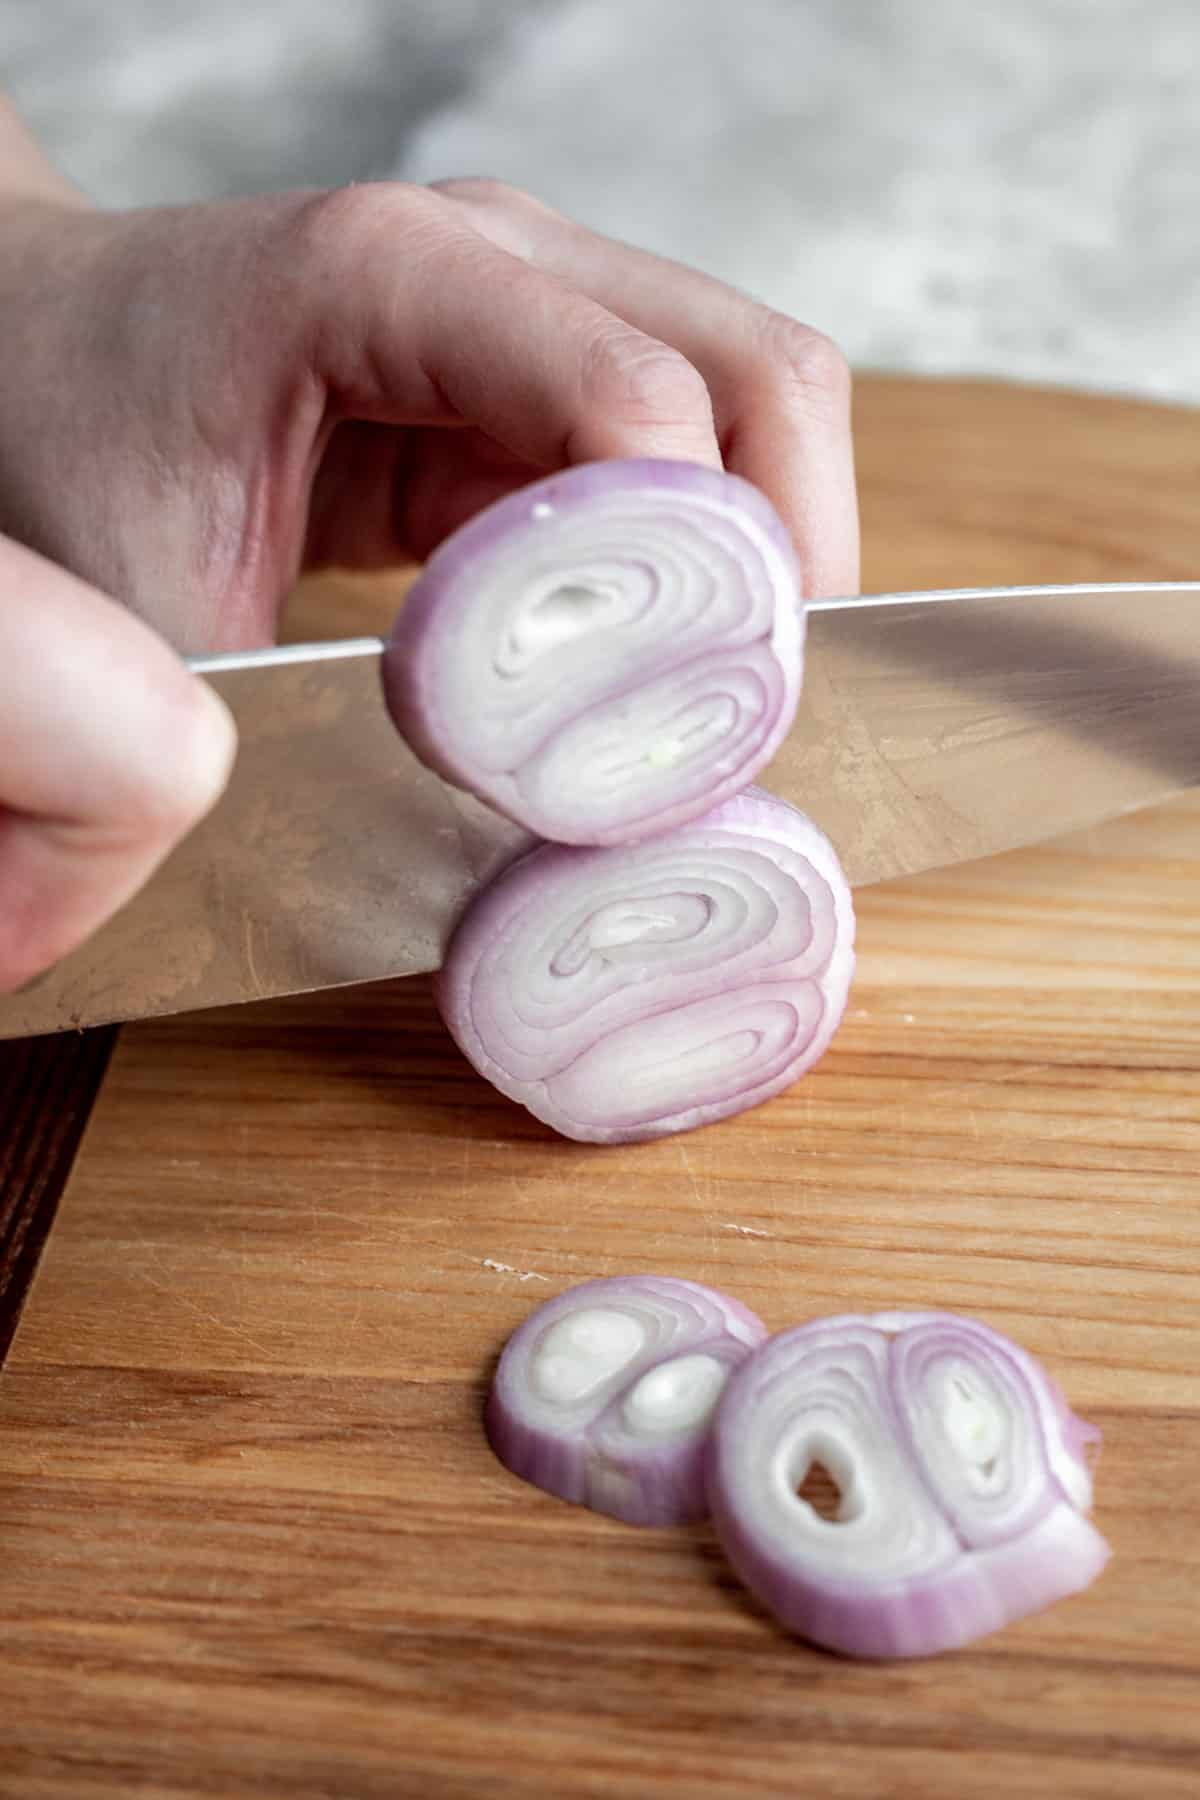 A chef's knife slicing a shallot into multiple rings.